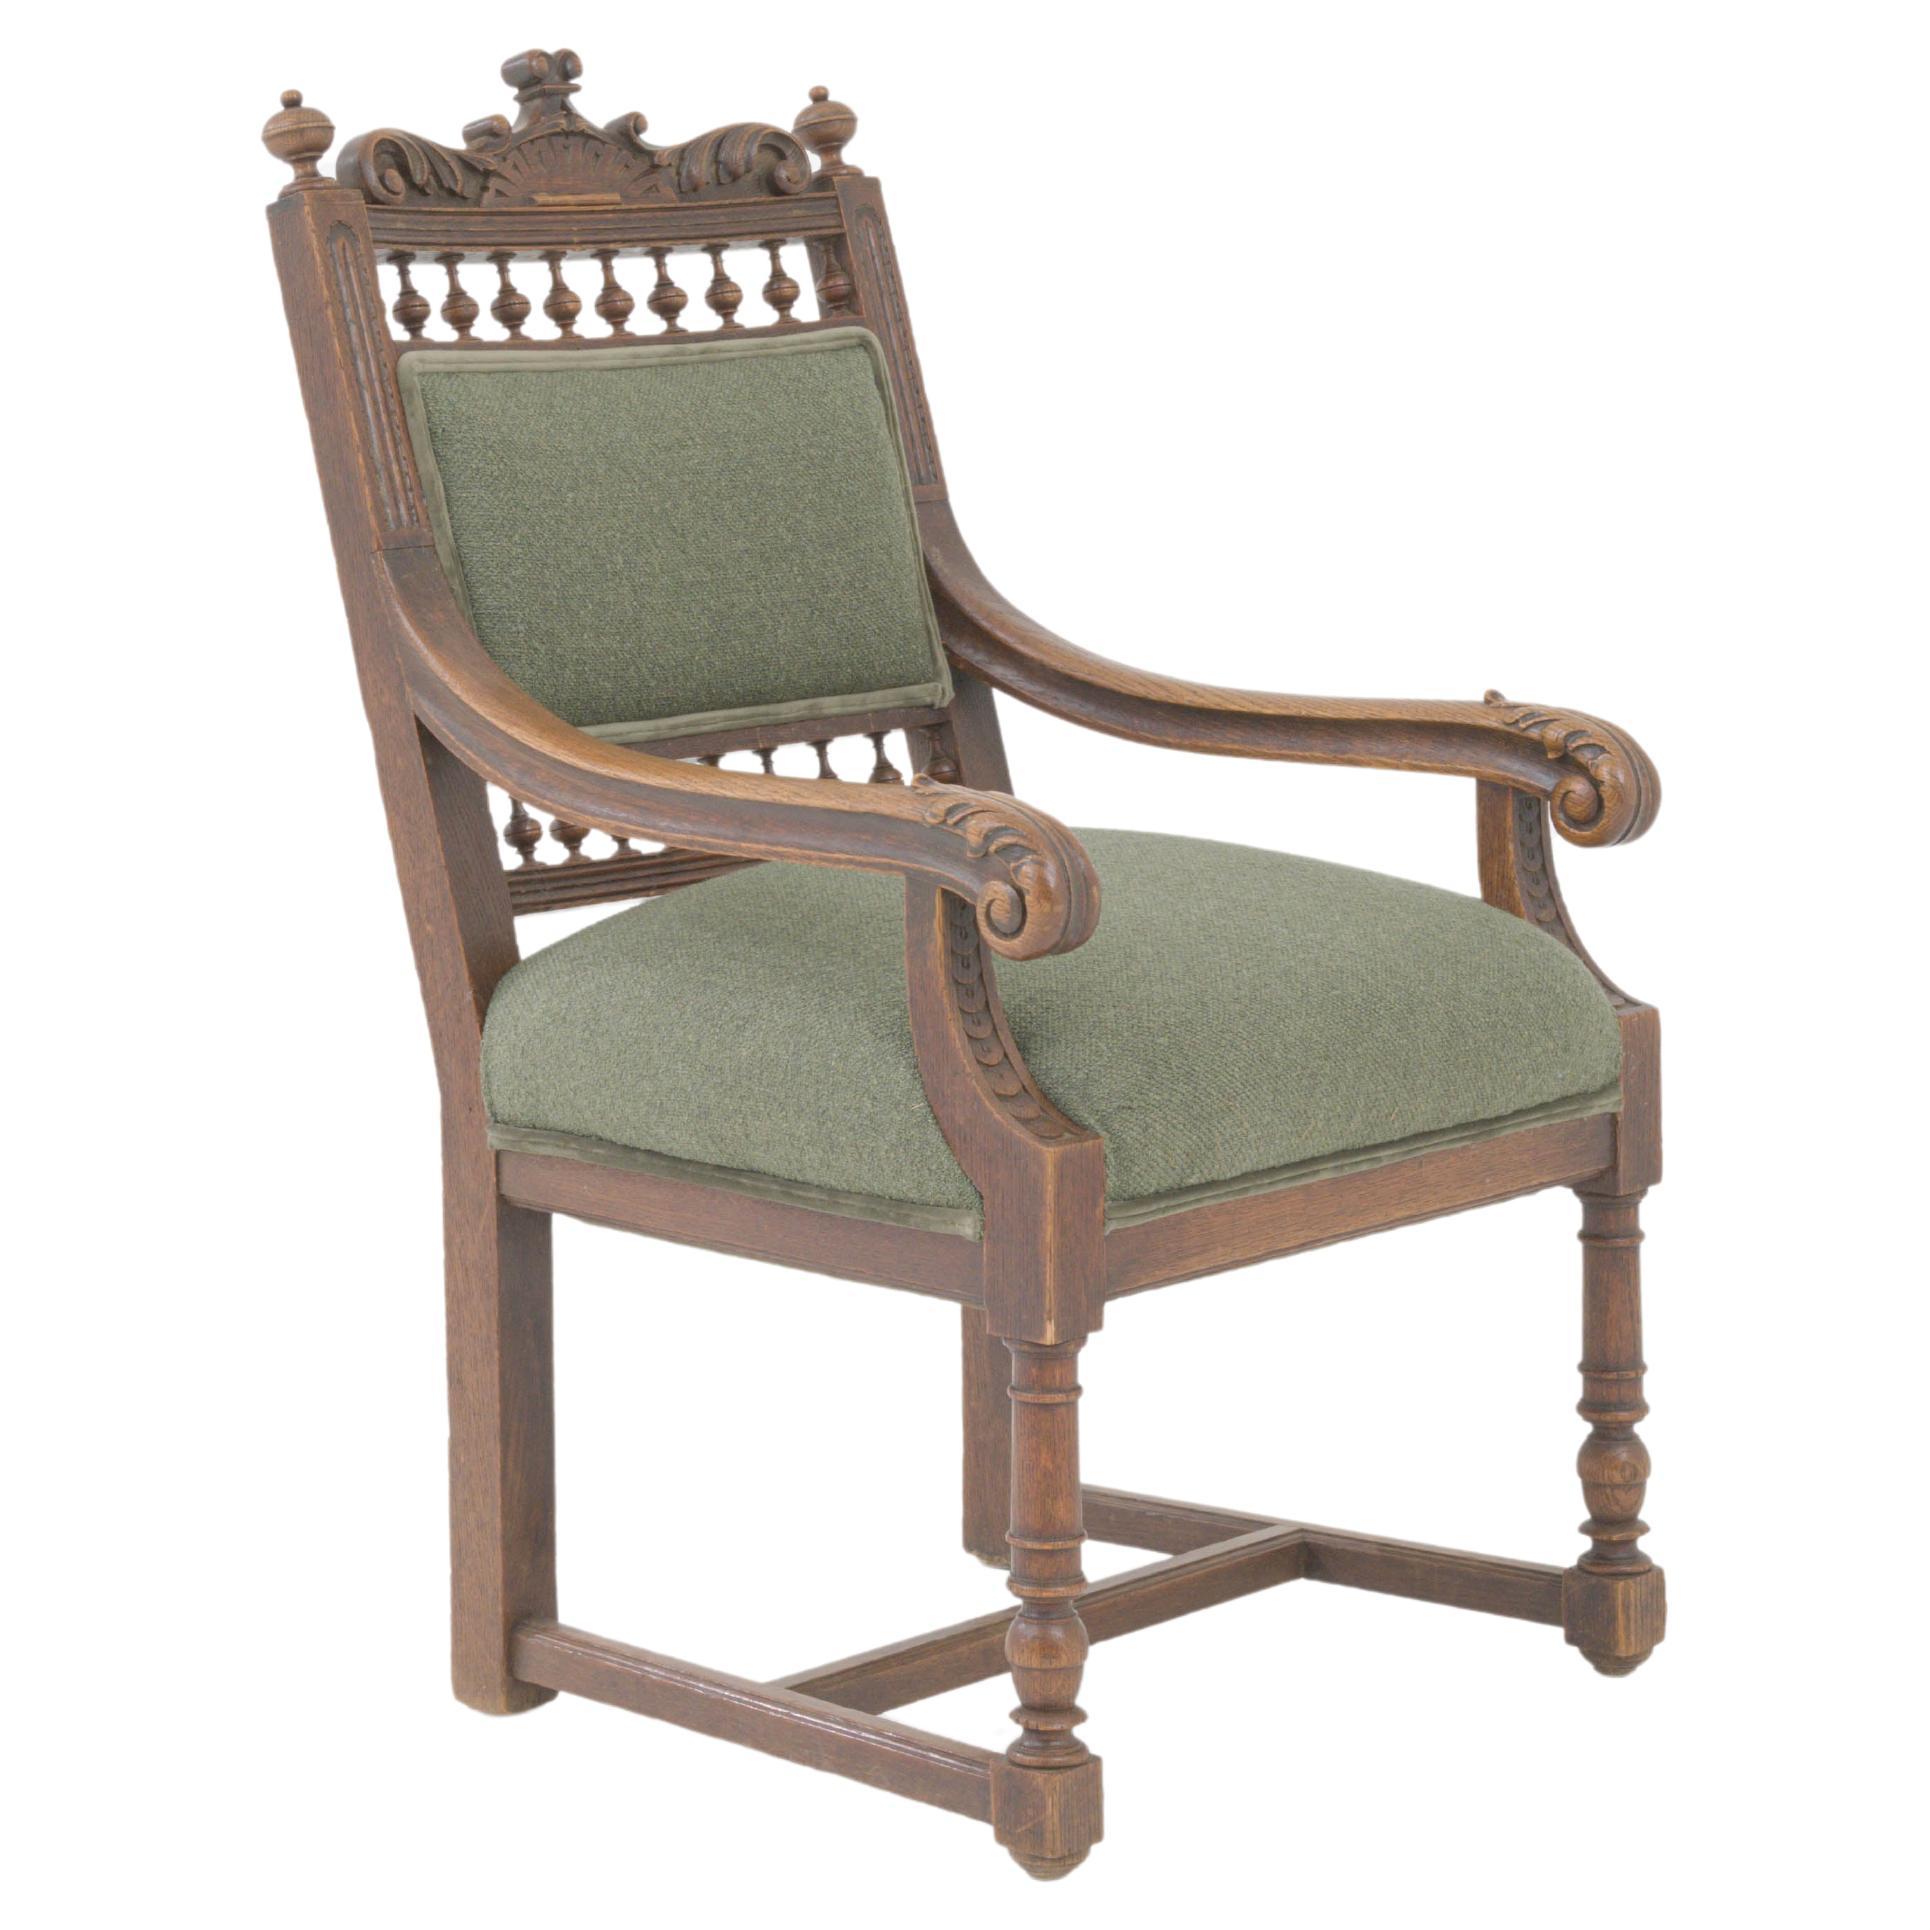 19th Century French Upholstered Armchair